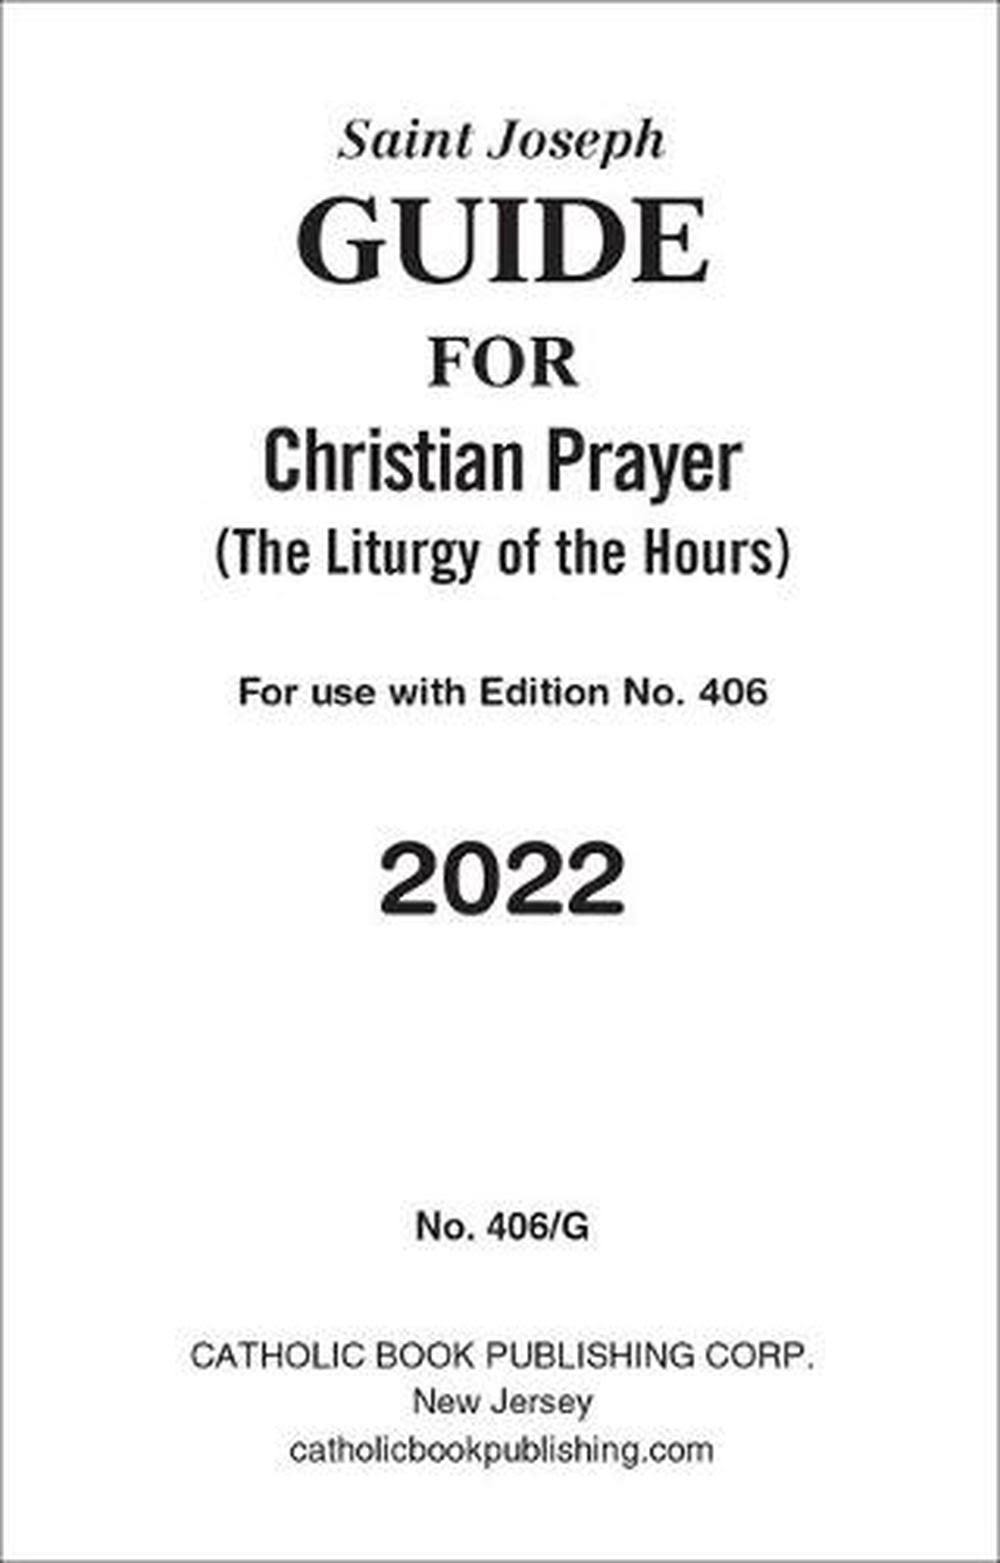 Christian Prayer Guide for 2022 by Catholic Book Publishing Corp